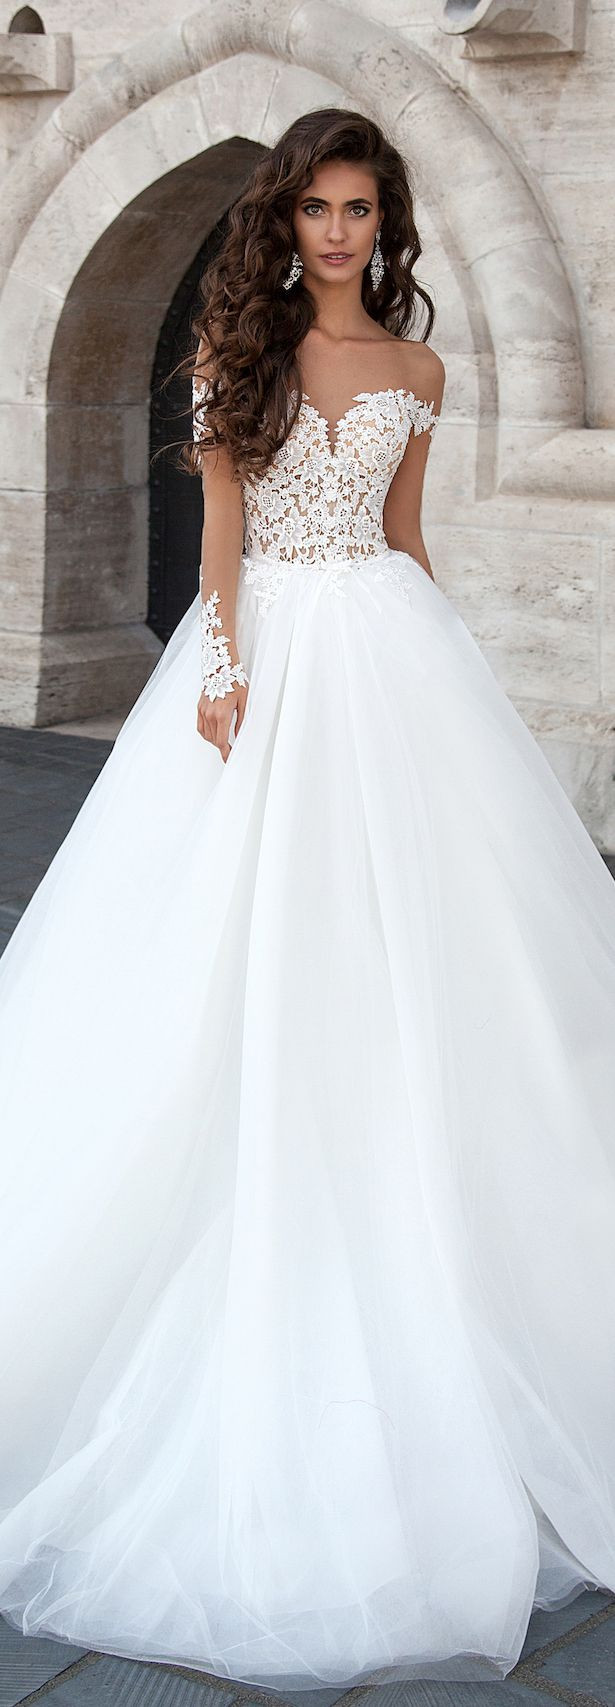 Wedding Gowns Pinterest
 1928 best images about Beautiful wedding gowns on